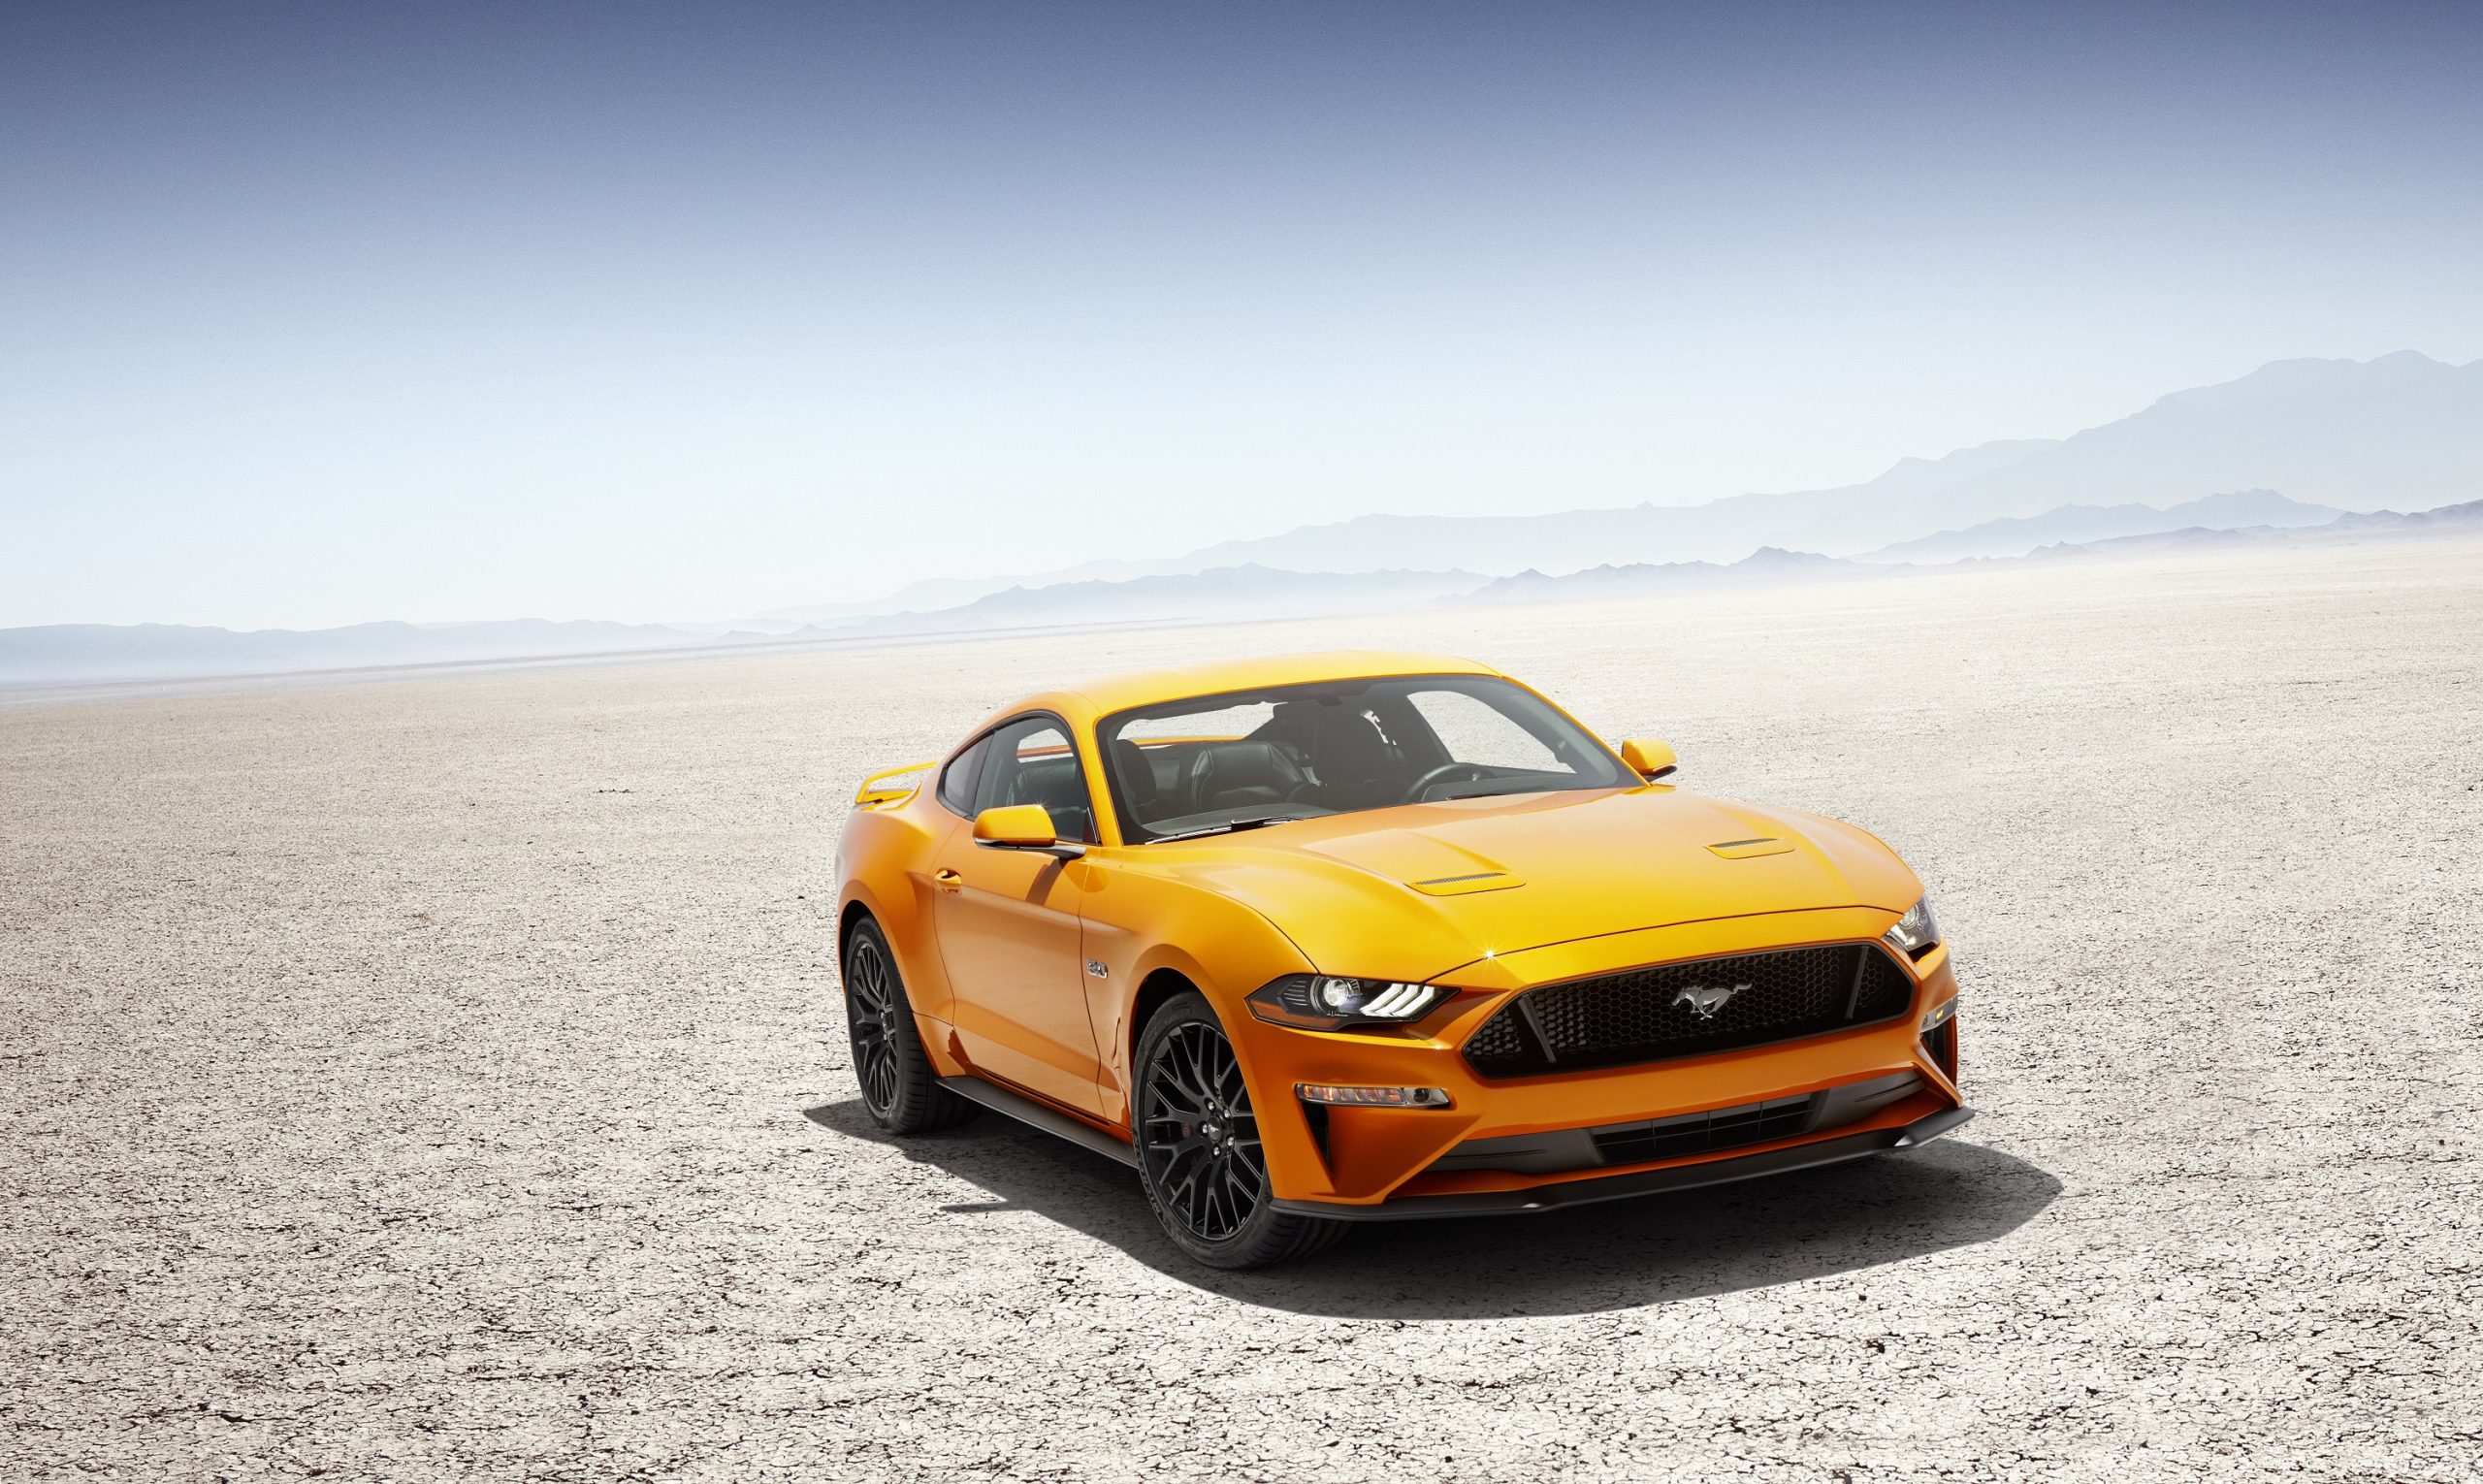 An orange Ford Mustang shot from the front 3/4 in the desert